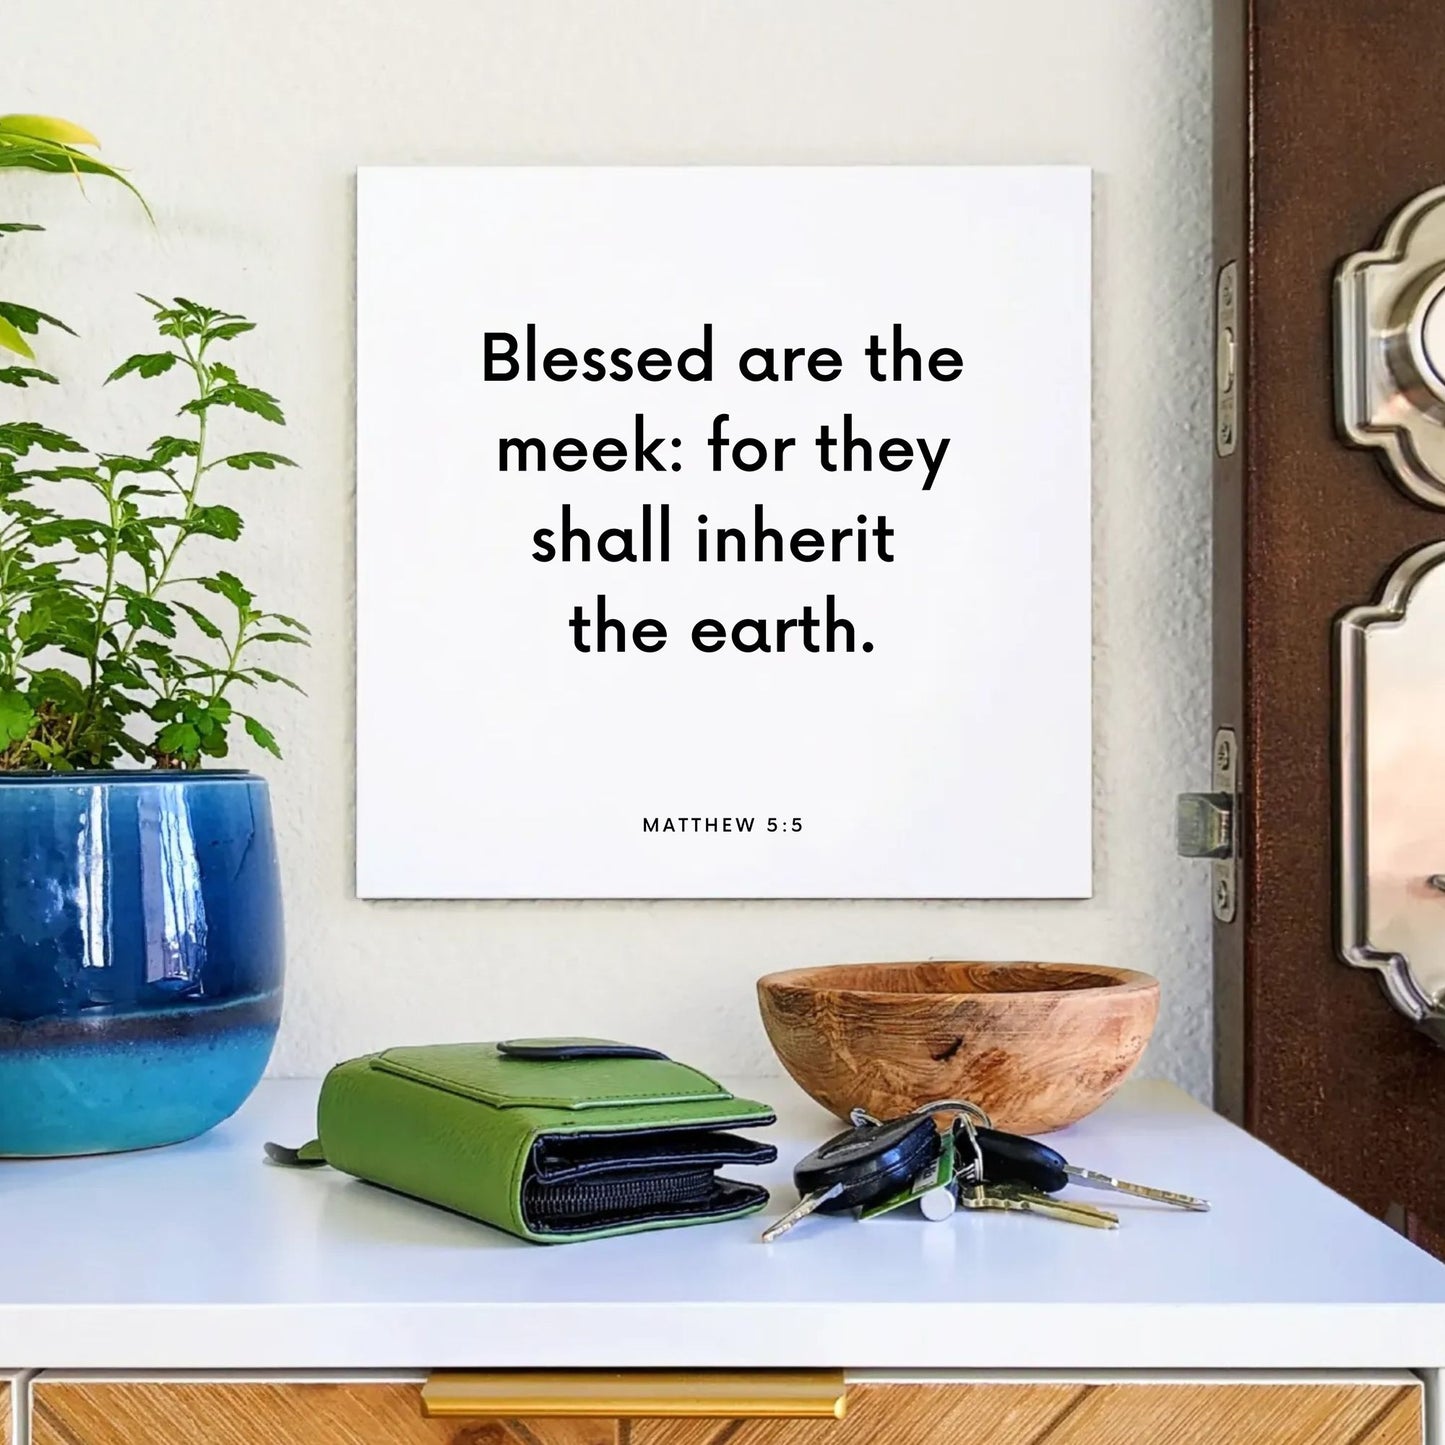 Entryway mouting of the scripture tile for Matthew 5:5 - "Blessed are the meek: for they shall inherit the earth"